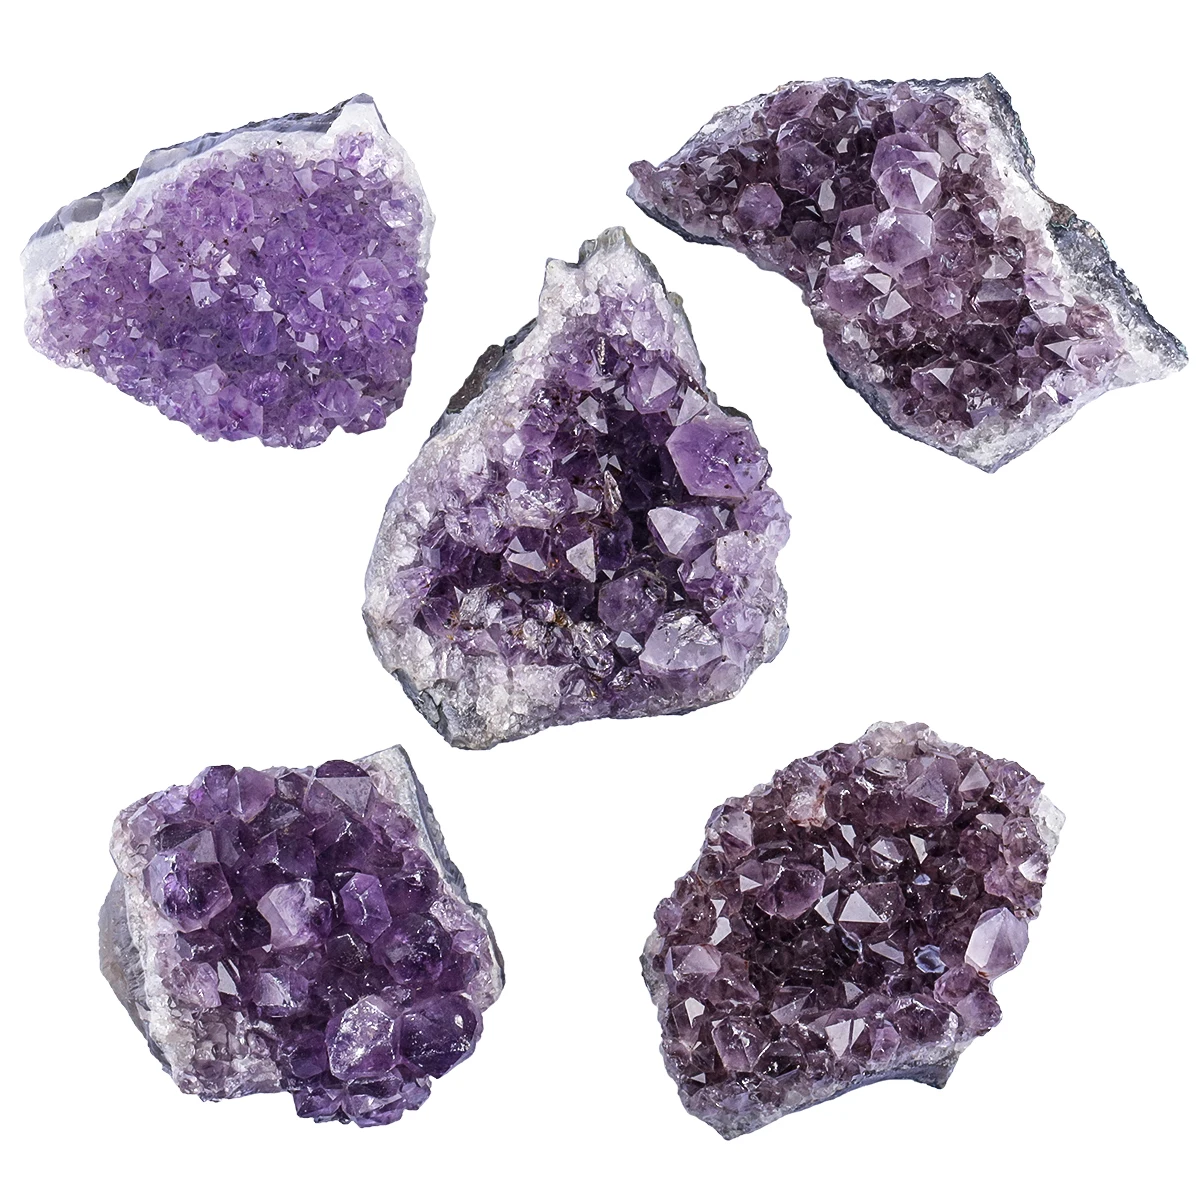 400g Natural Amethyst Cluster Healing Rough Gemstone Mineral Specimen Chakra Balancing For Home Decoration tumbeelluwa natural rough rose quartz candlestick irregular candle holder potted plants table decoration home decor ornaments